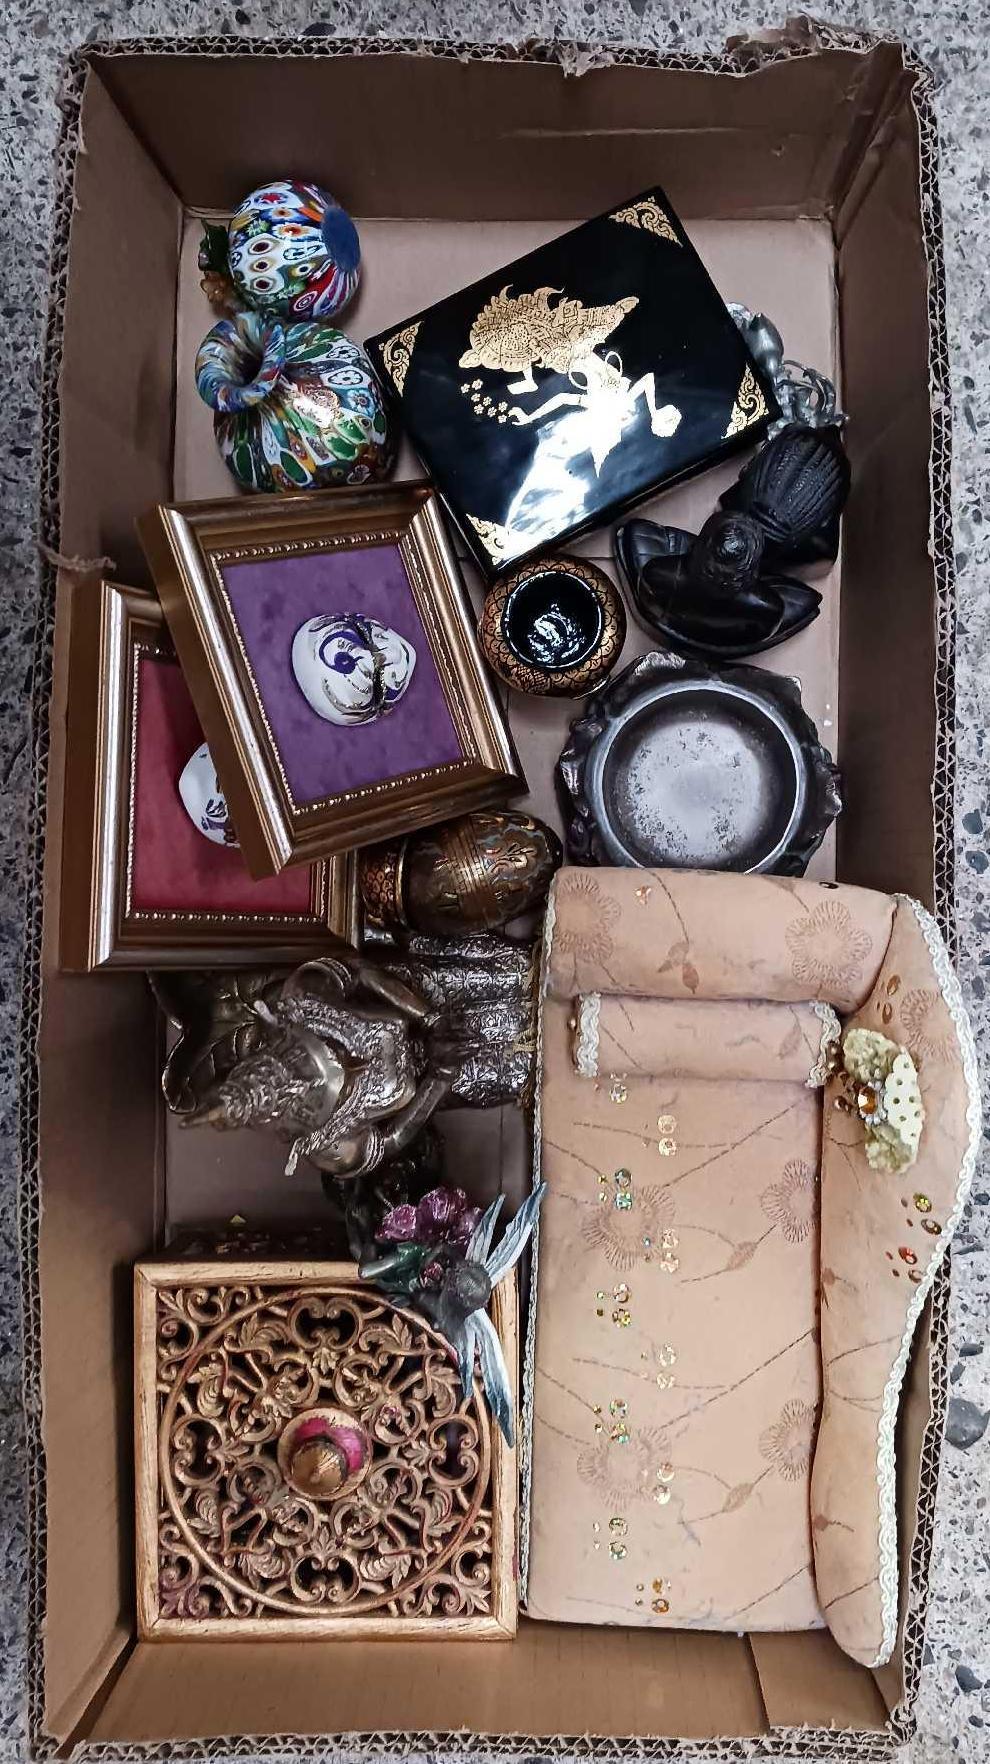 CARTON WITH TRINKET BOXES, SMALL FRAMED MASQUERADE MASK,